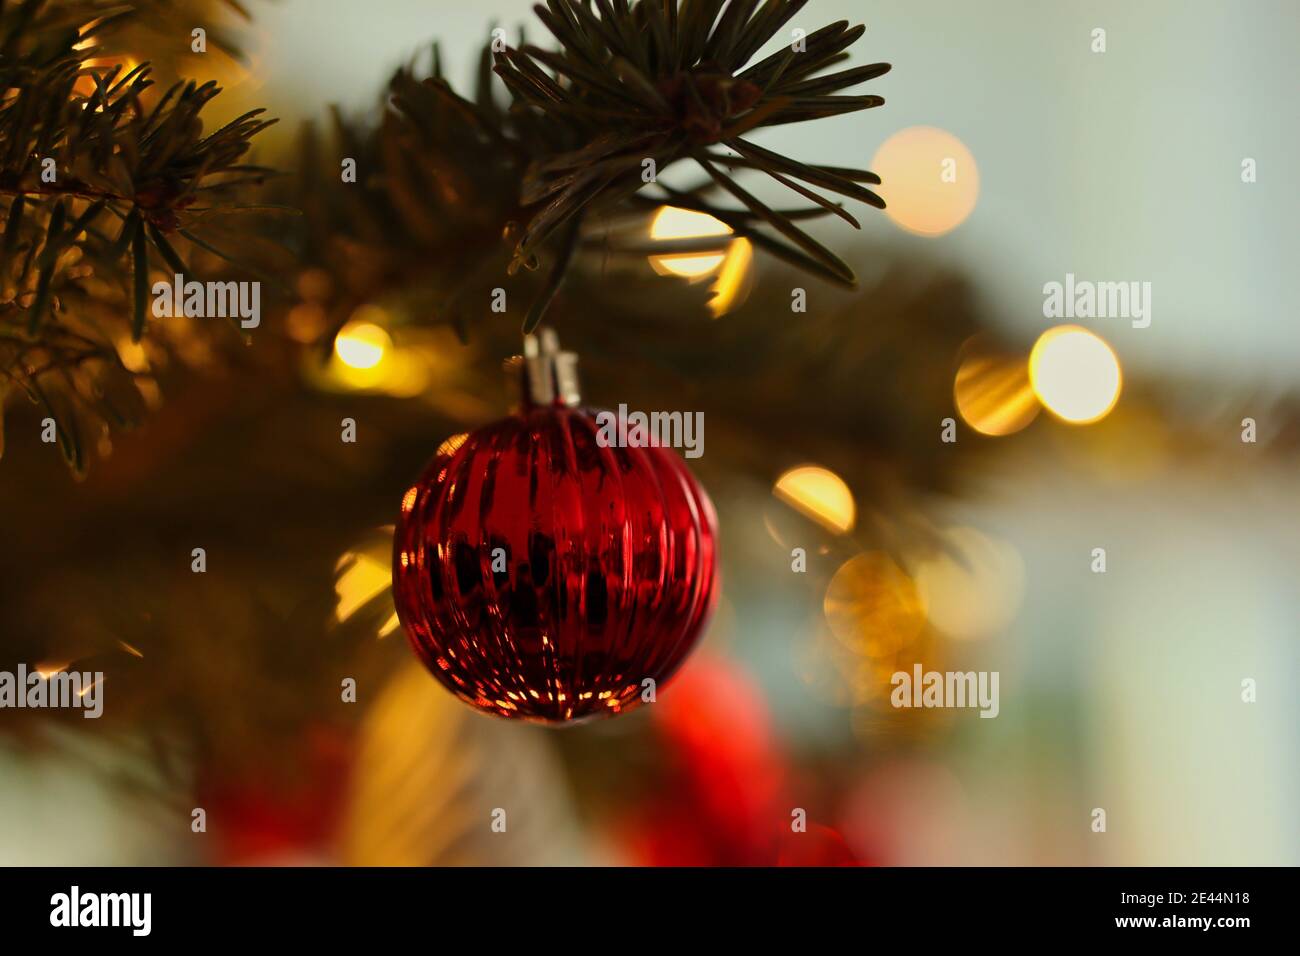 Hanging Red Christmas Ornament on Tree during Festive Season. Shiny Ball Ornament on Tree Branch. Stock Photo